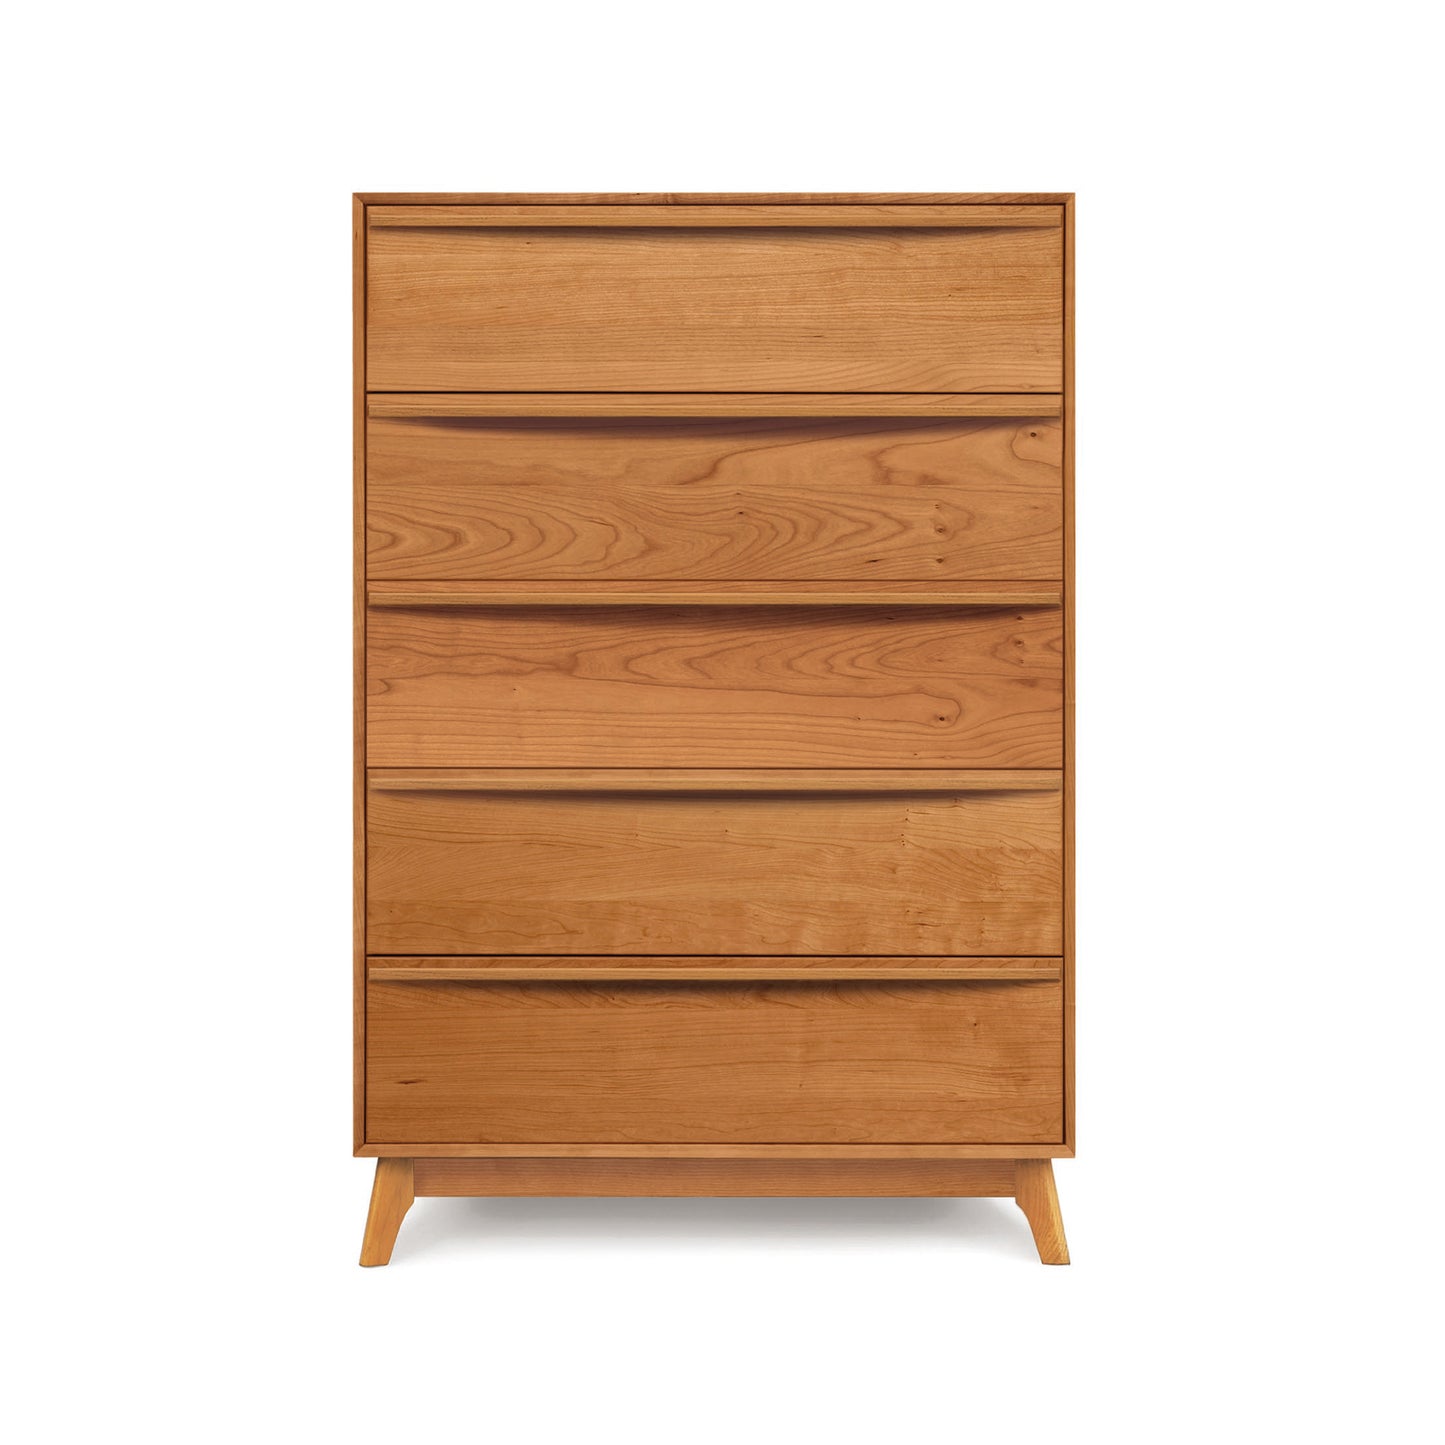 A mid-century modern style wooden chest of drawers, specifically the Copeland Furniture Catalina 5-Drawer Wide Chest, displayed on a white background.